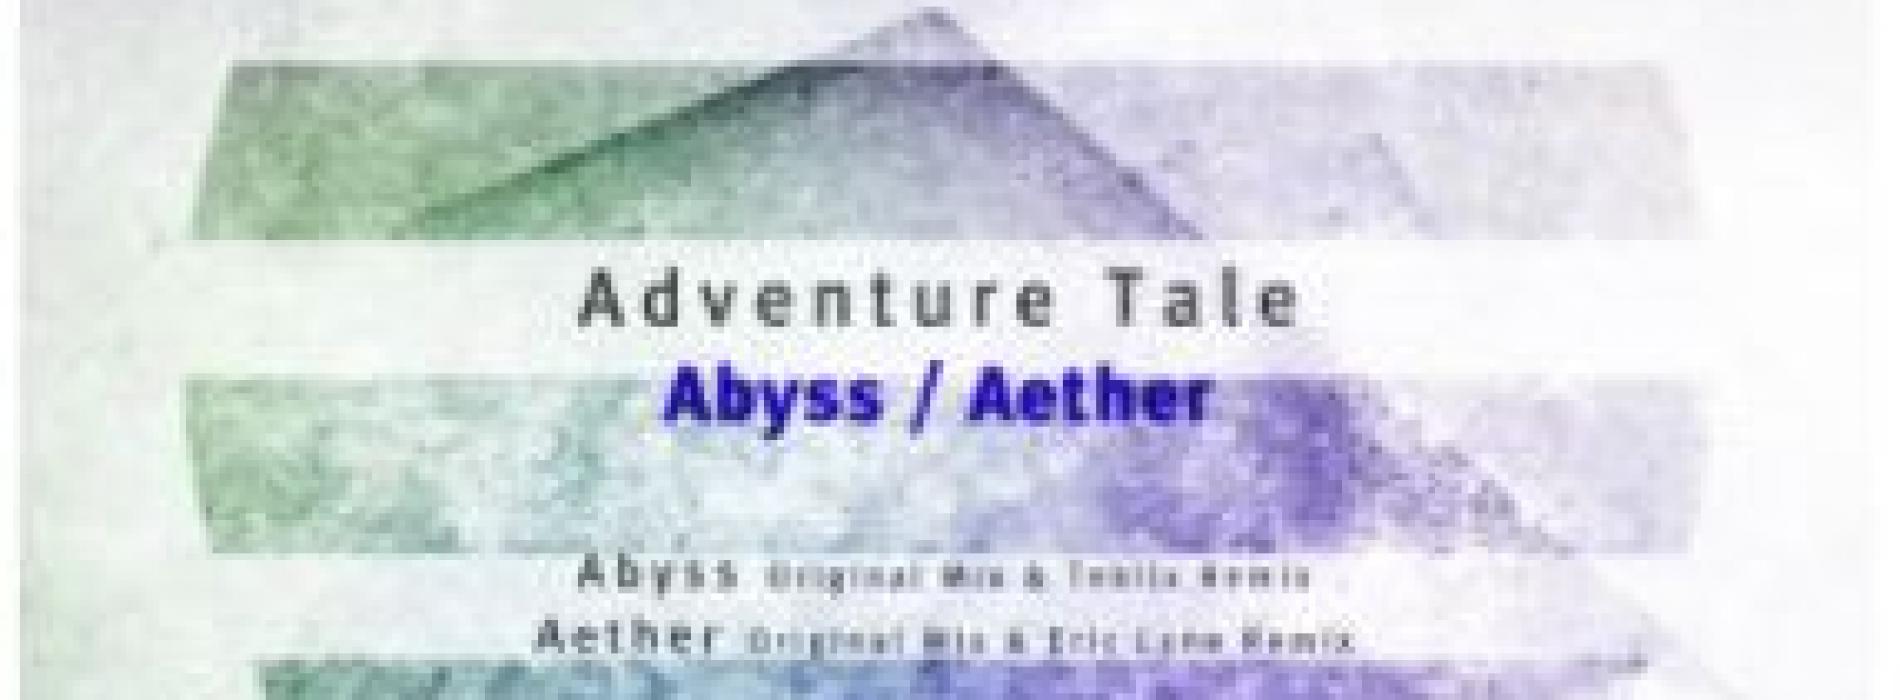 New Music : Adventure Tale – Abyss / Aether